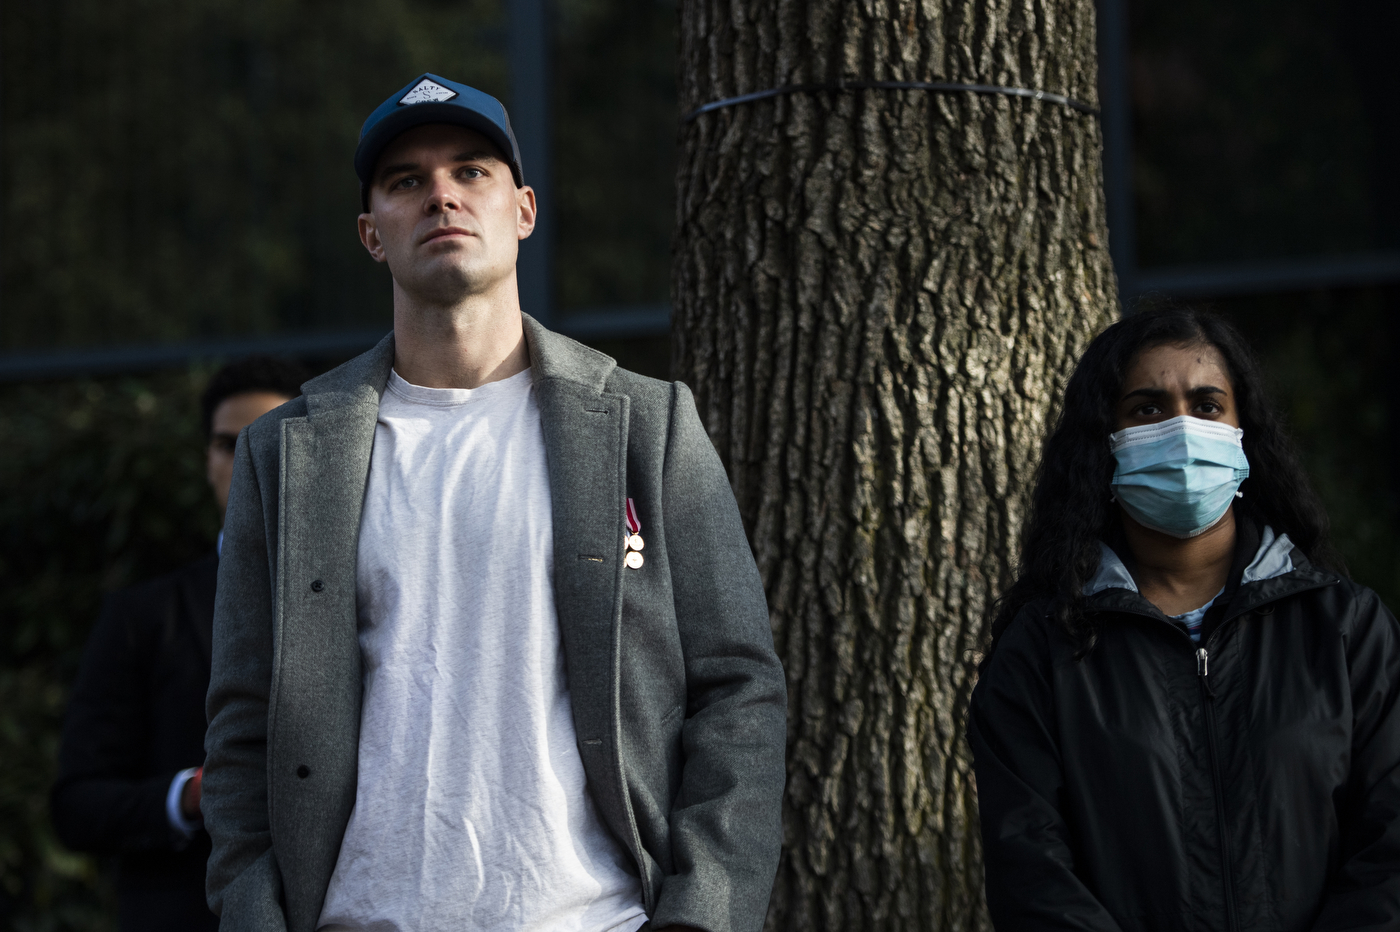 man with grey jacket and blue baseball cap stands next to a masked woman